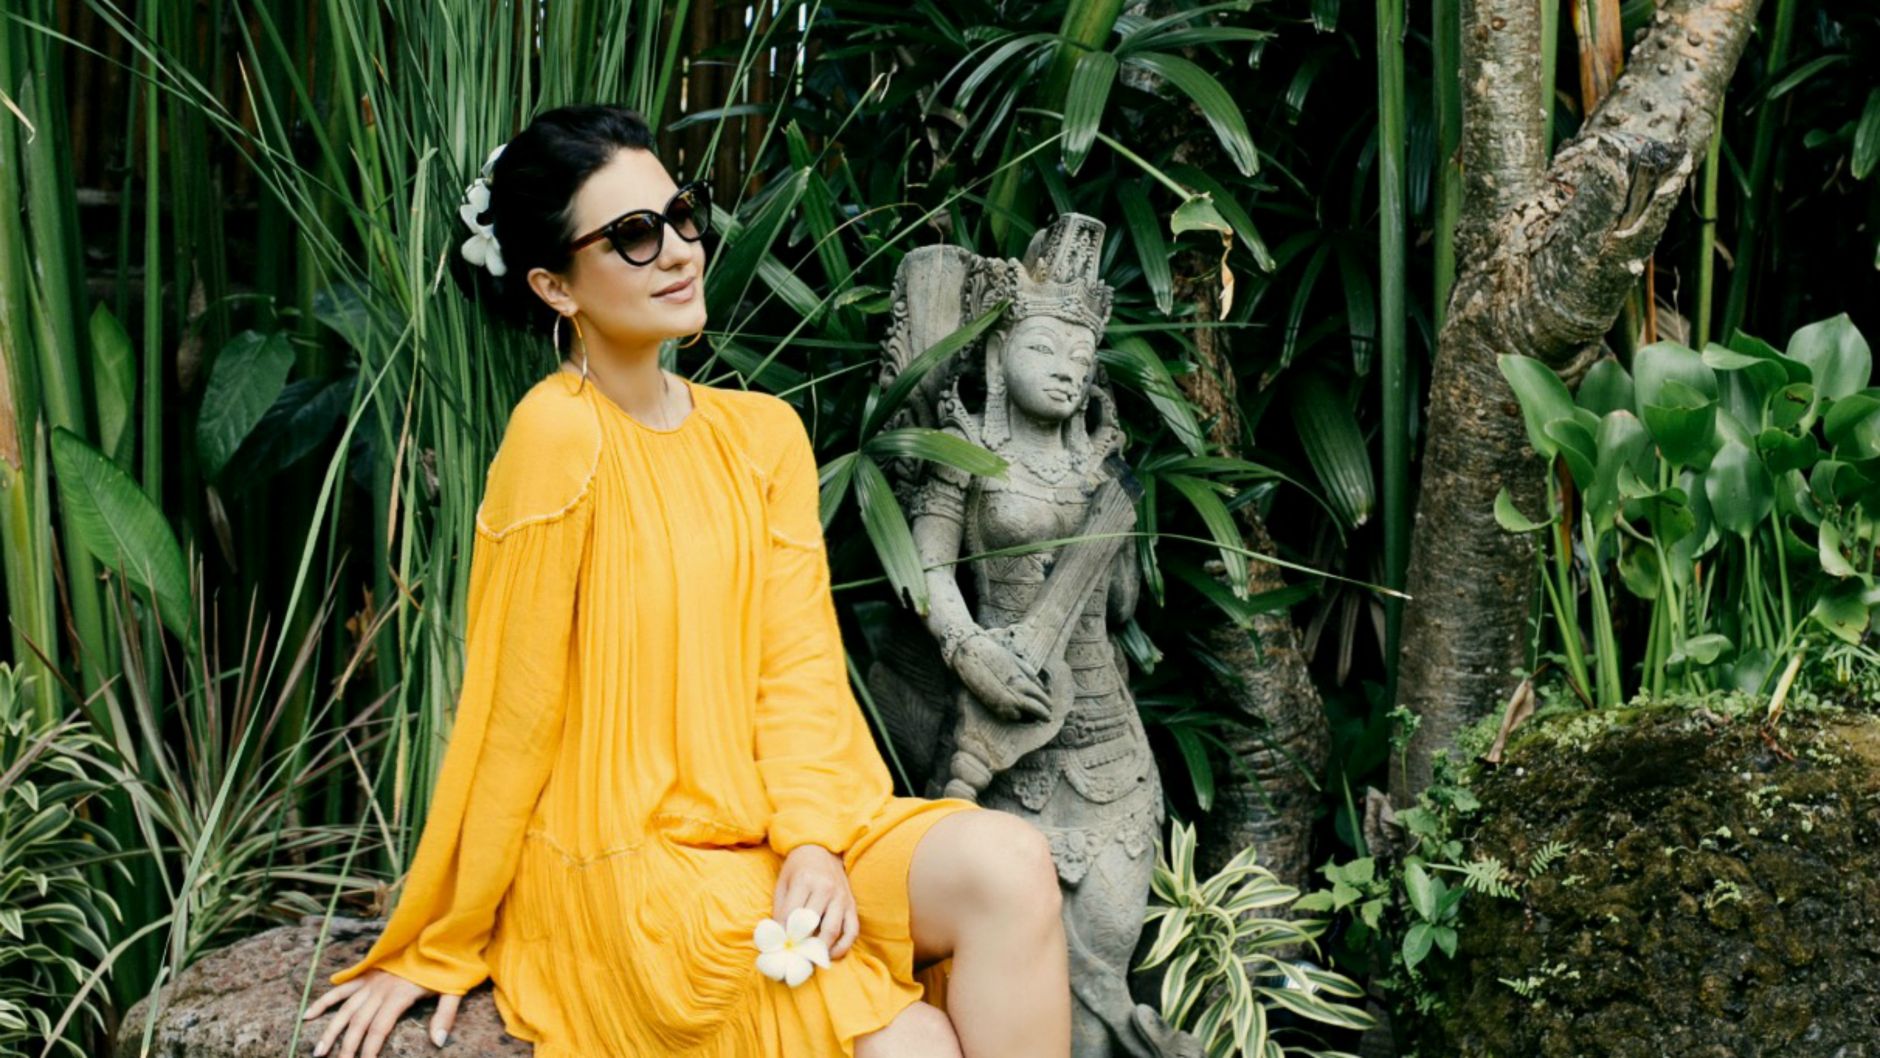 ARE YOU PLANNING A TRIP TO BALI? YOU NEED TO READ THIS!